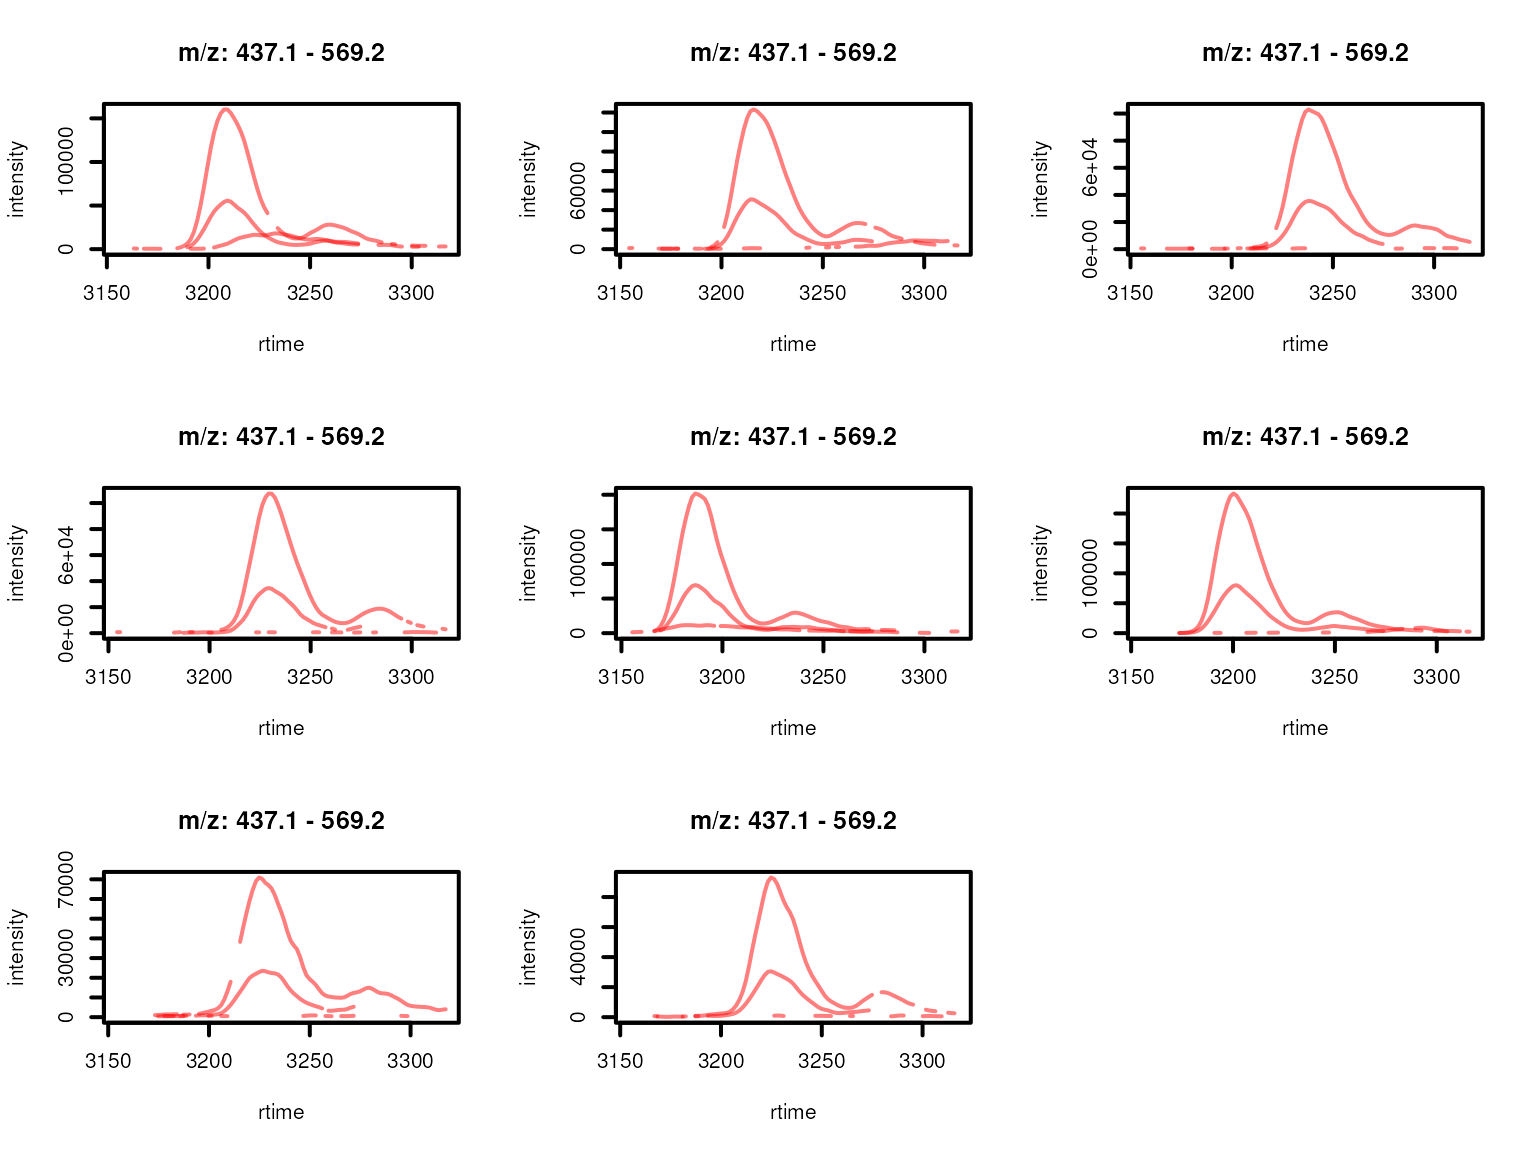 Feature EICs per sample for features from a feature group defined by rentention time and feature abudances across samples. Features with high correlation of their EICs are shown in the same color.